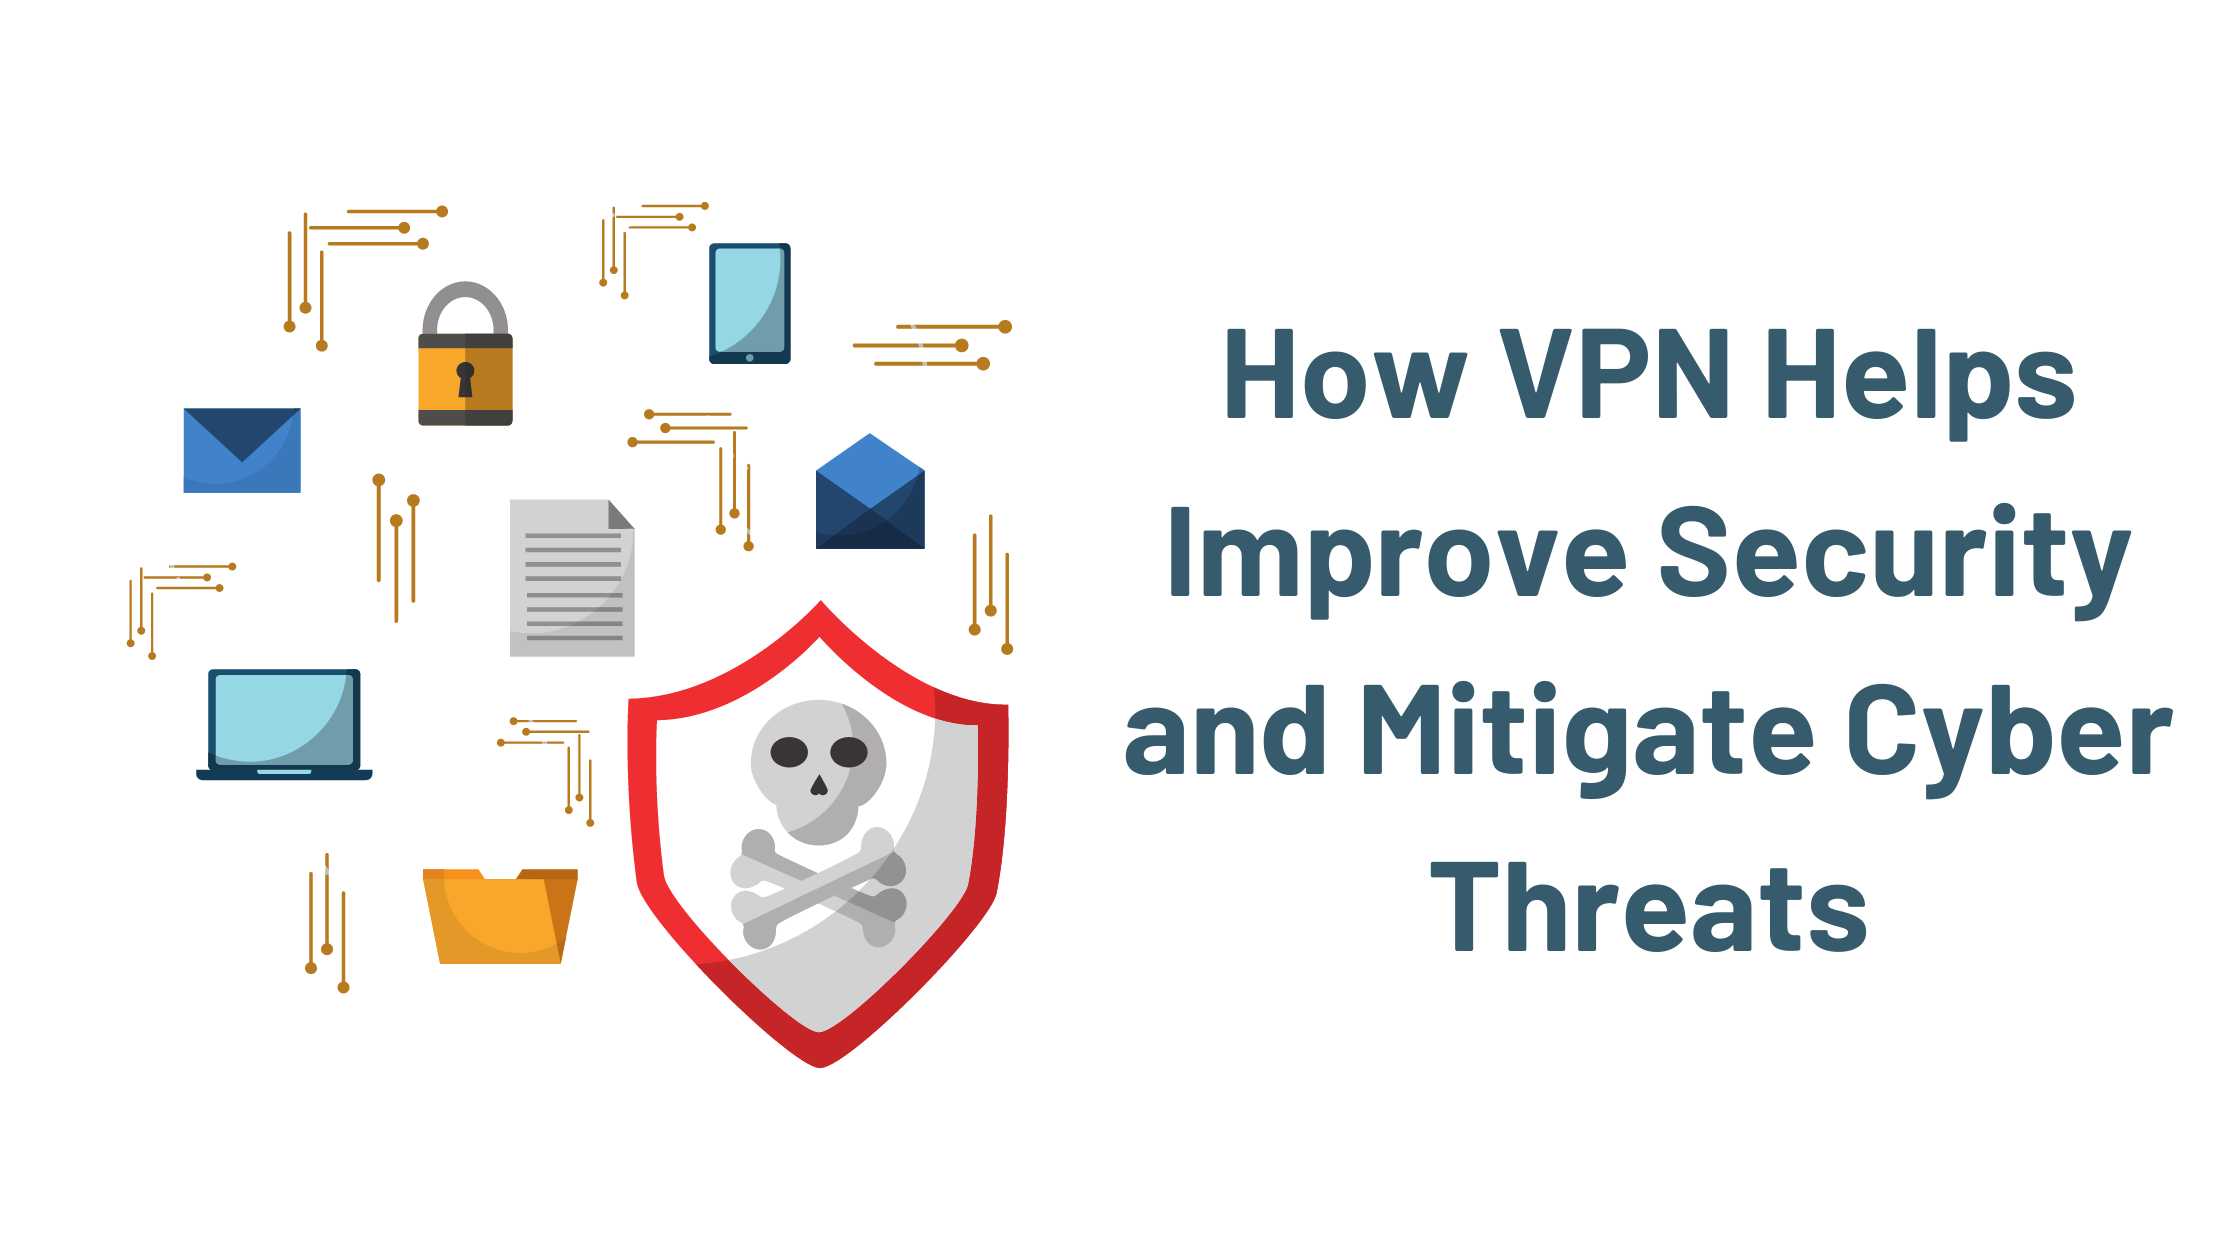 How VPN Helps Improve Security and Mitigate Cyber Threats